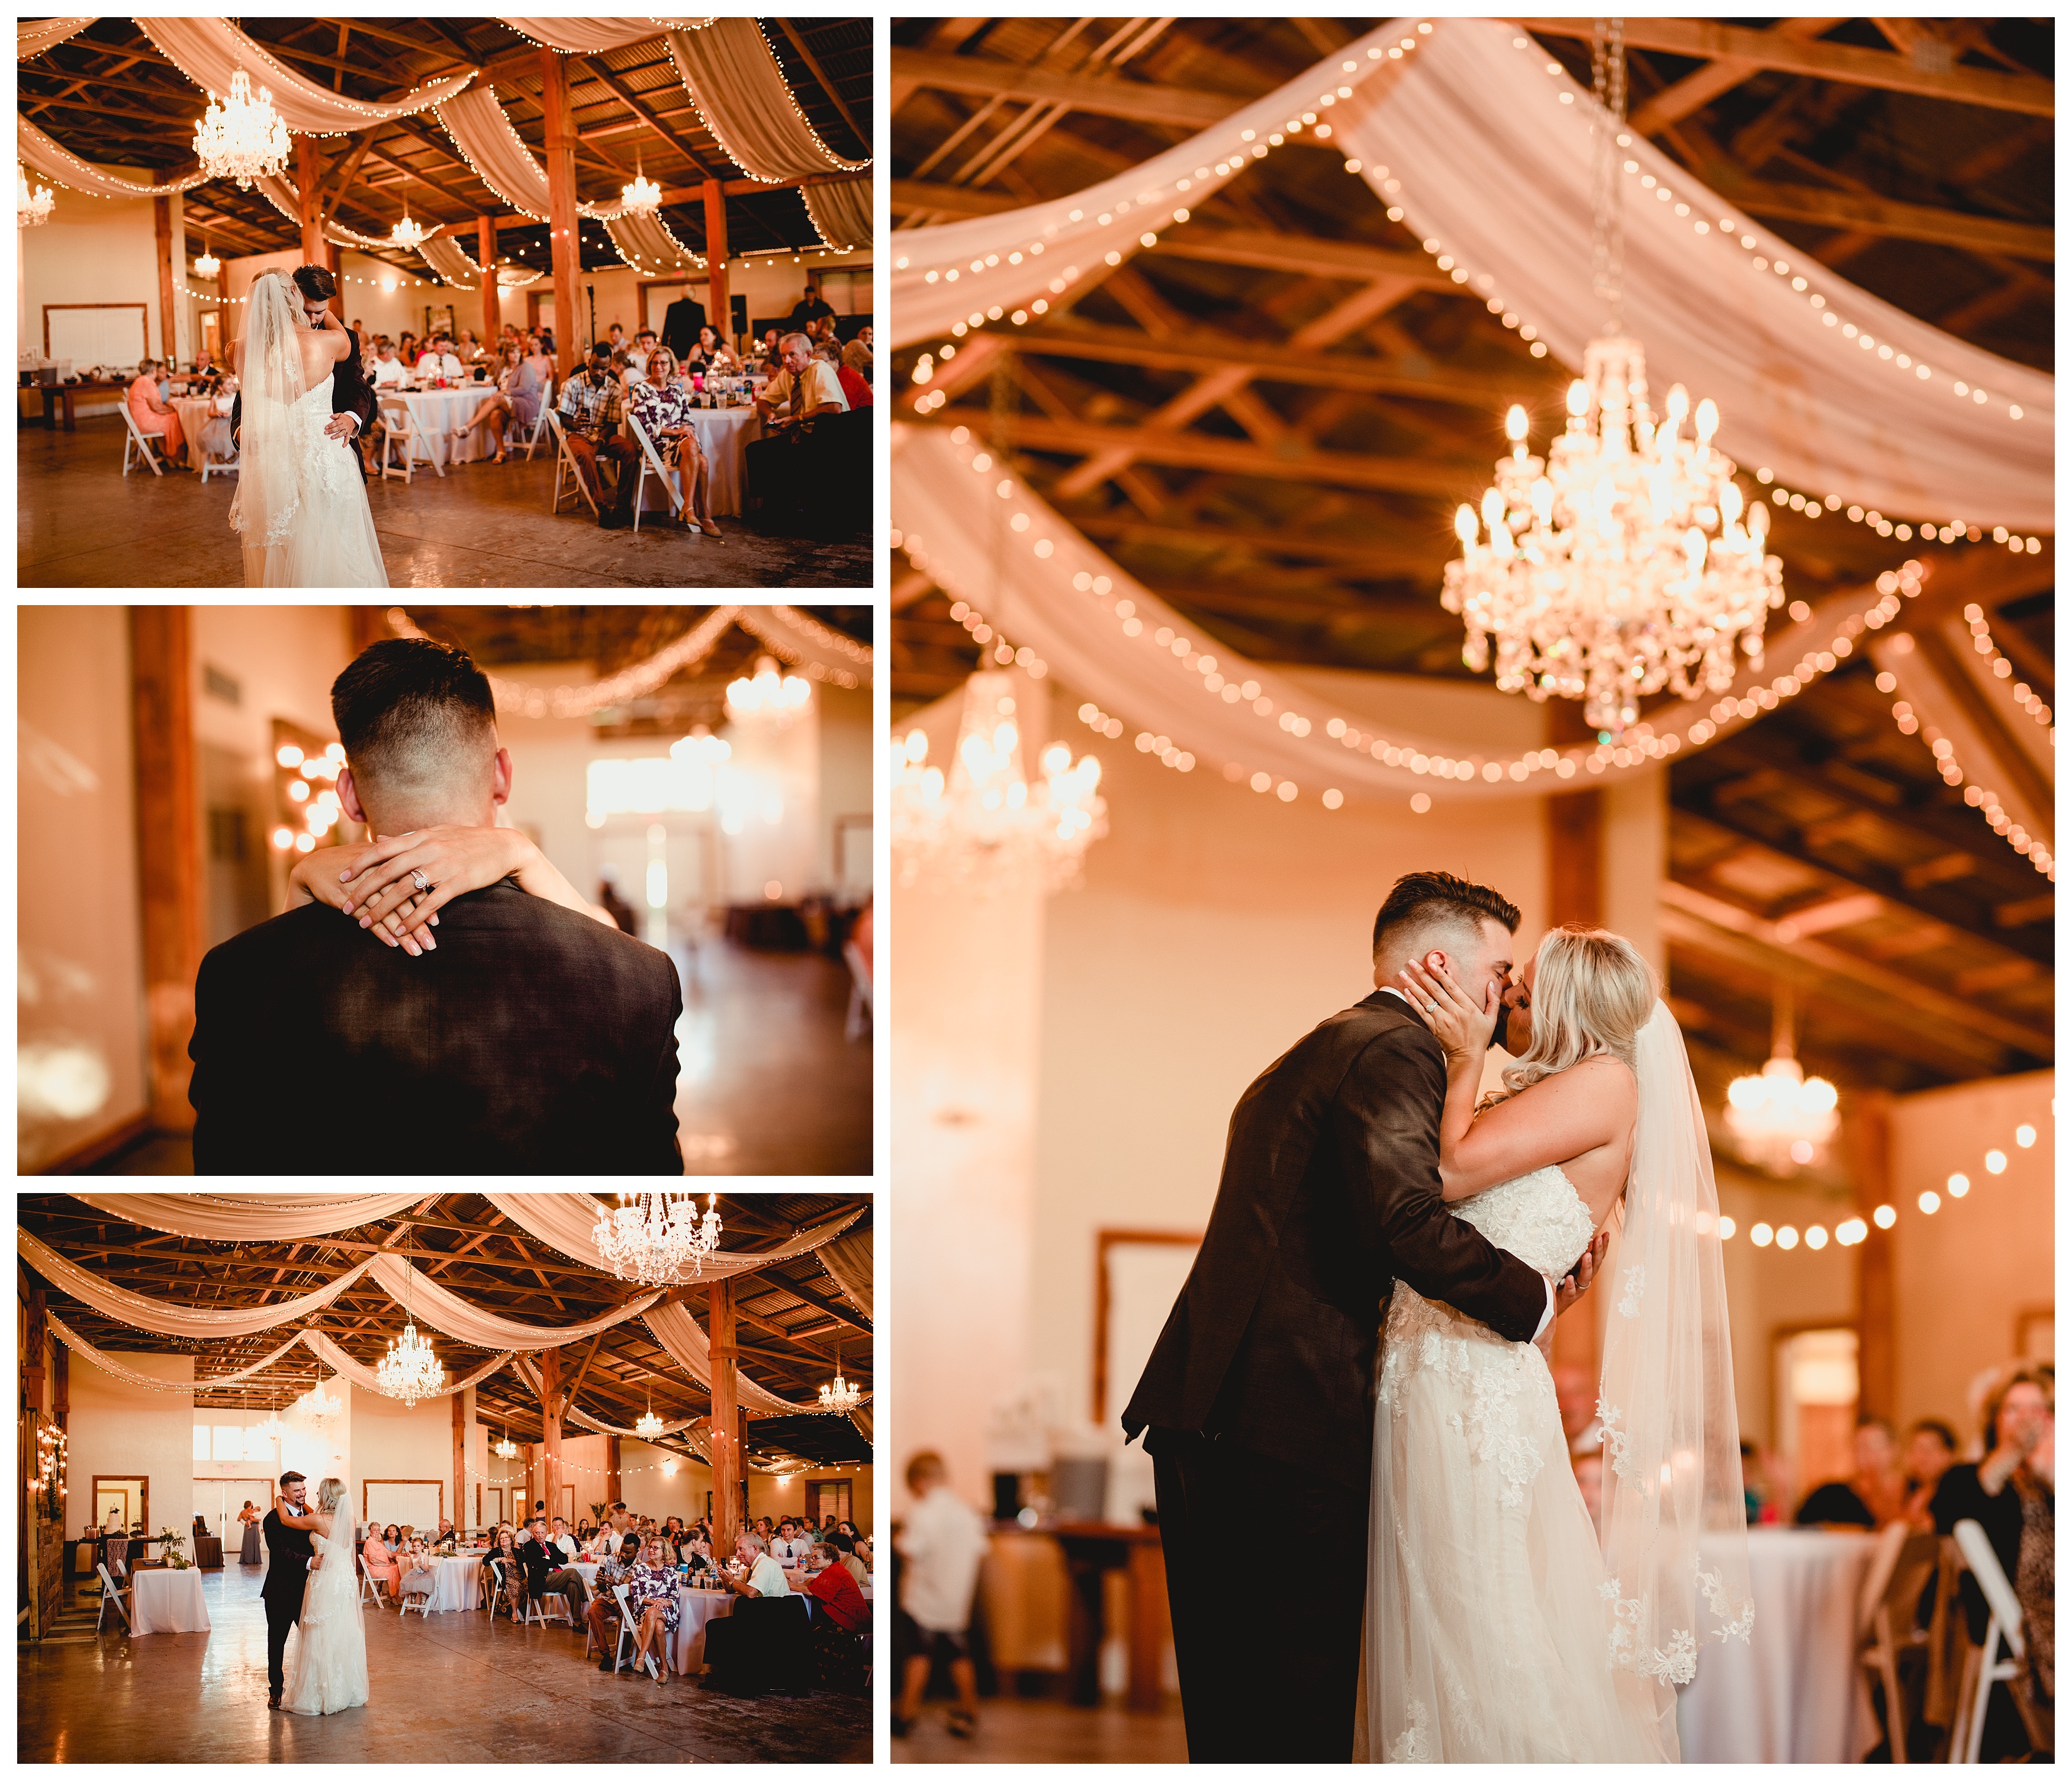 First dance photos by professional wedding photographer Shelly Williams located in Tallahassee Florida